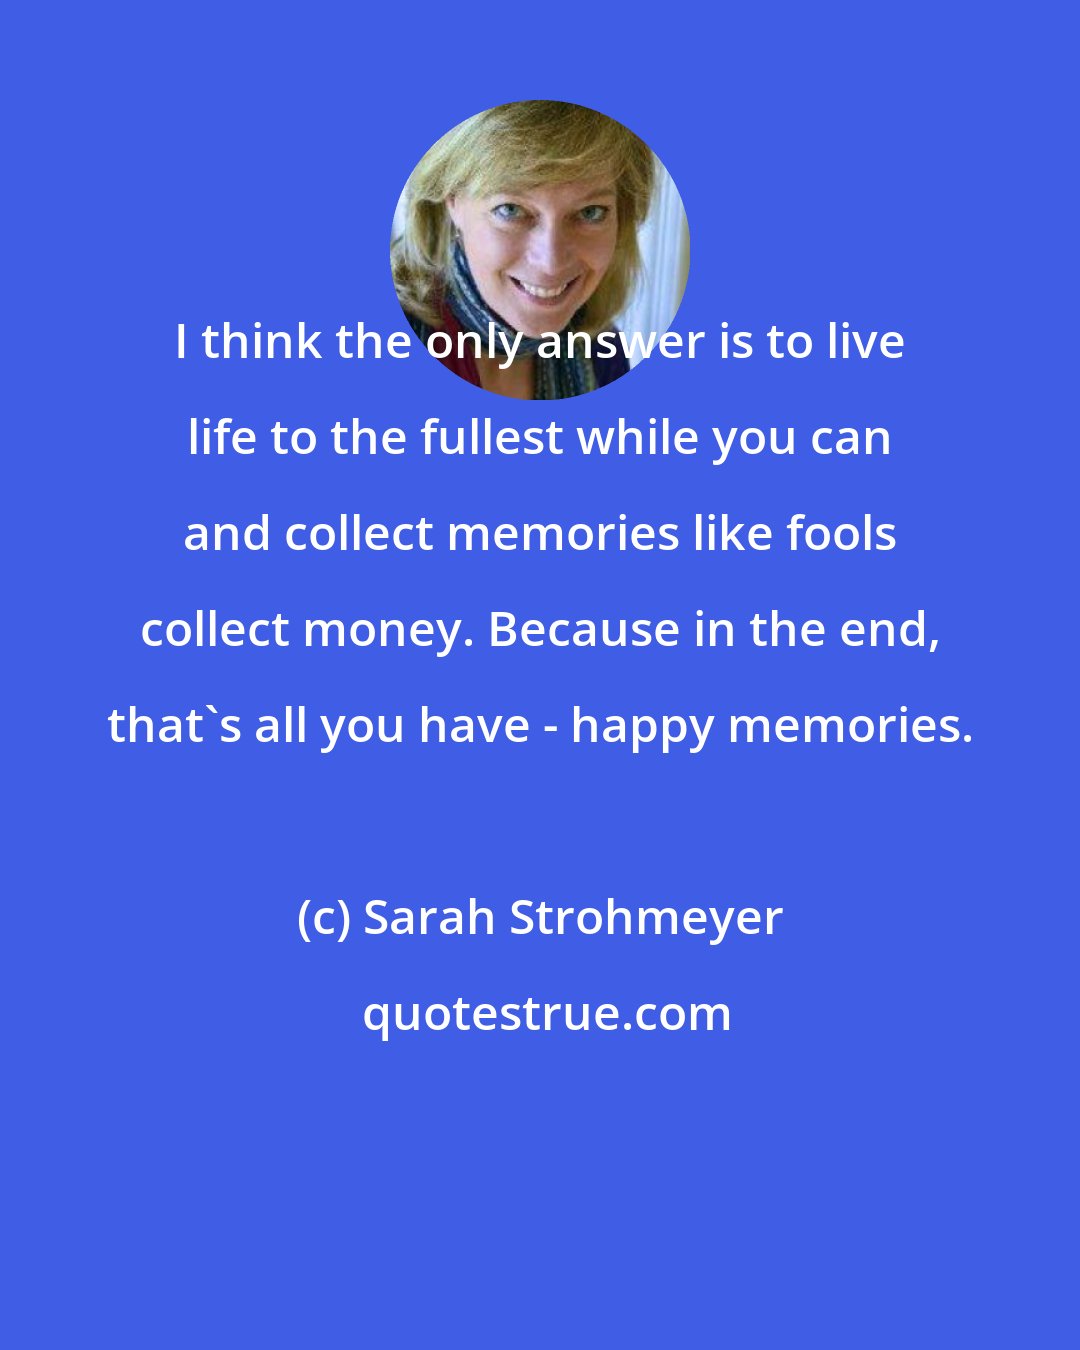 Sarah Strohmeyer: I think the only answer is to live life to the fullest while you can and collect memories like fools collect money. Because in the end, that's all you have - happy memories.